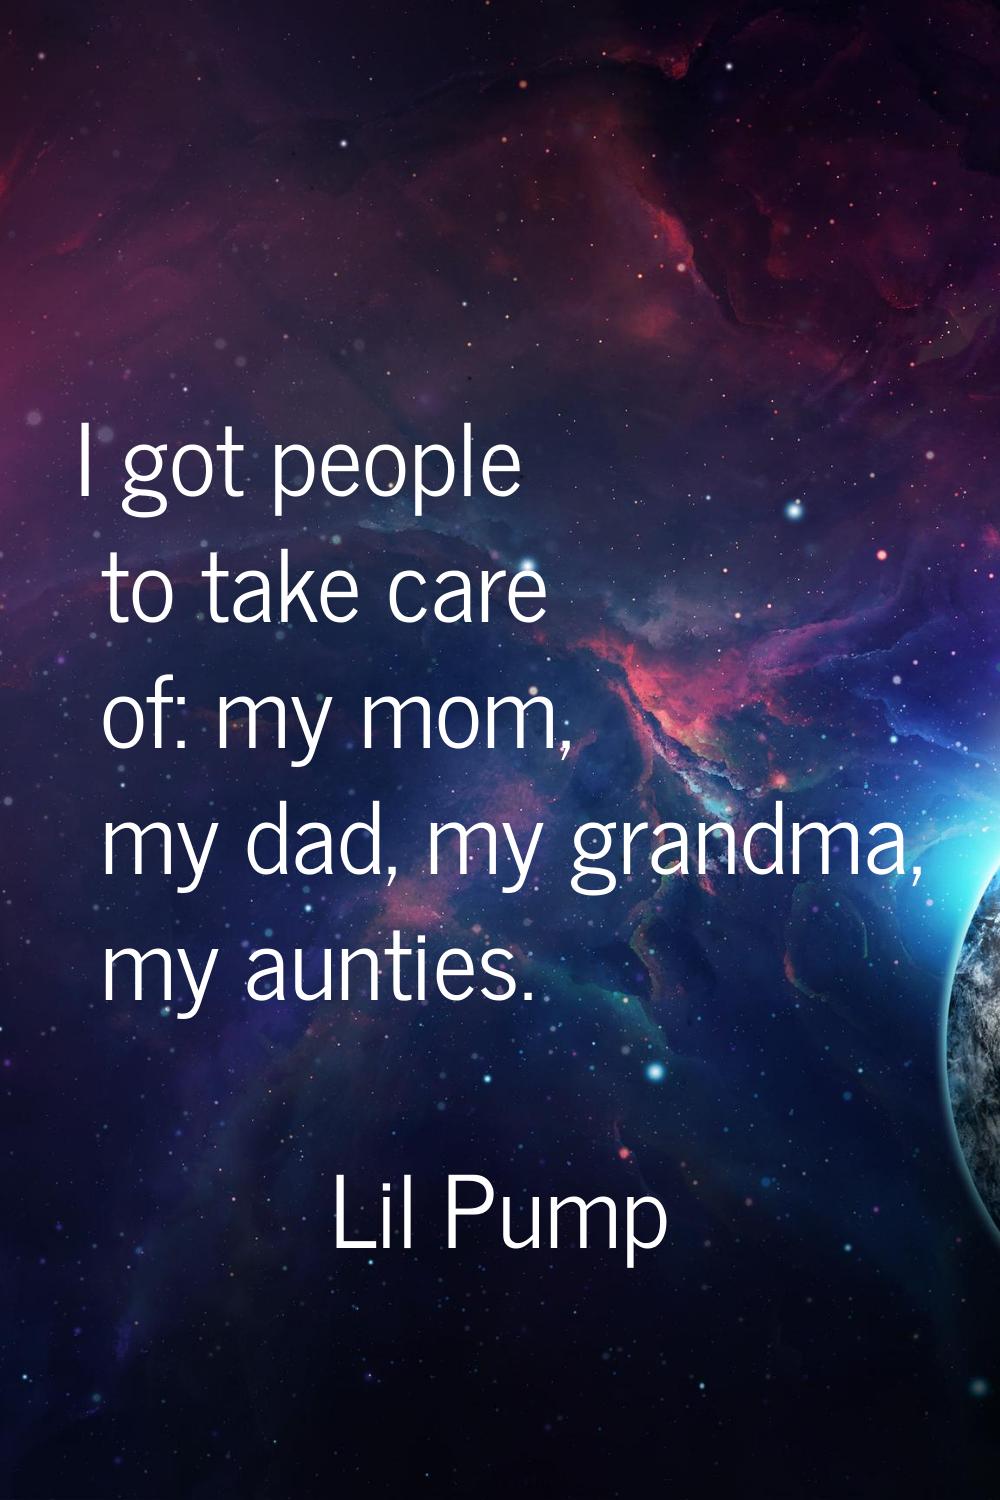 I got people to take care of: my mom, my dad, my grandma, my aunties.